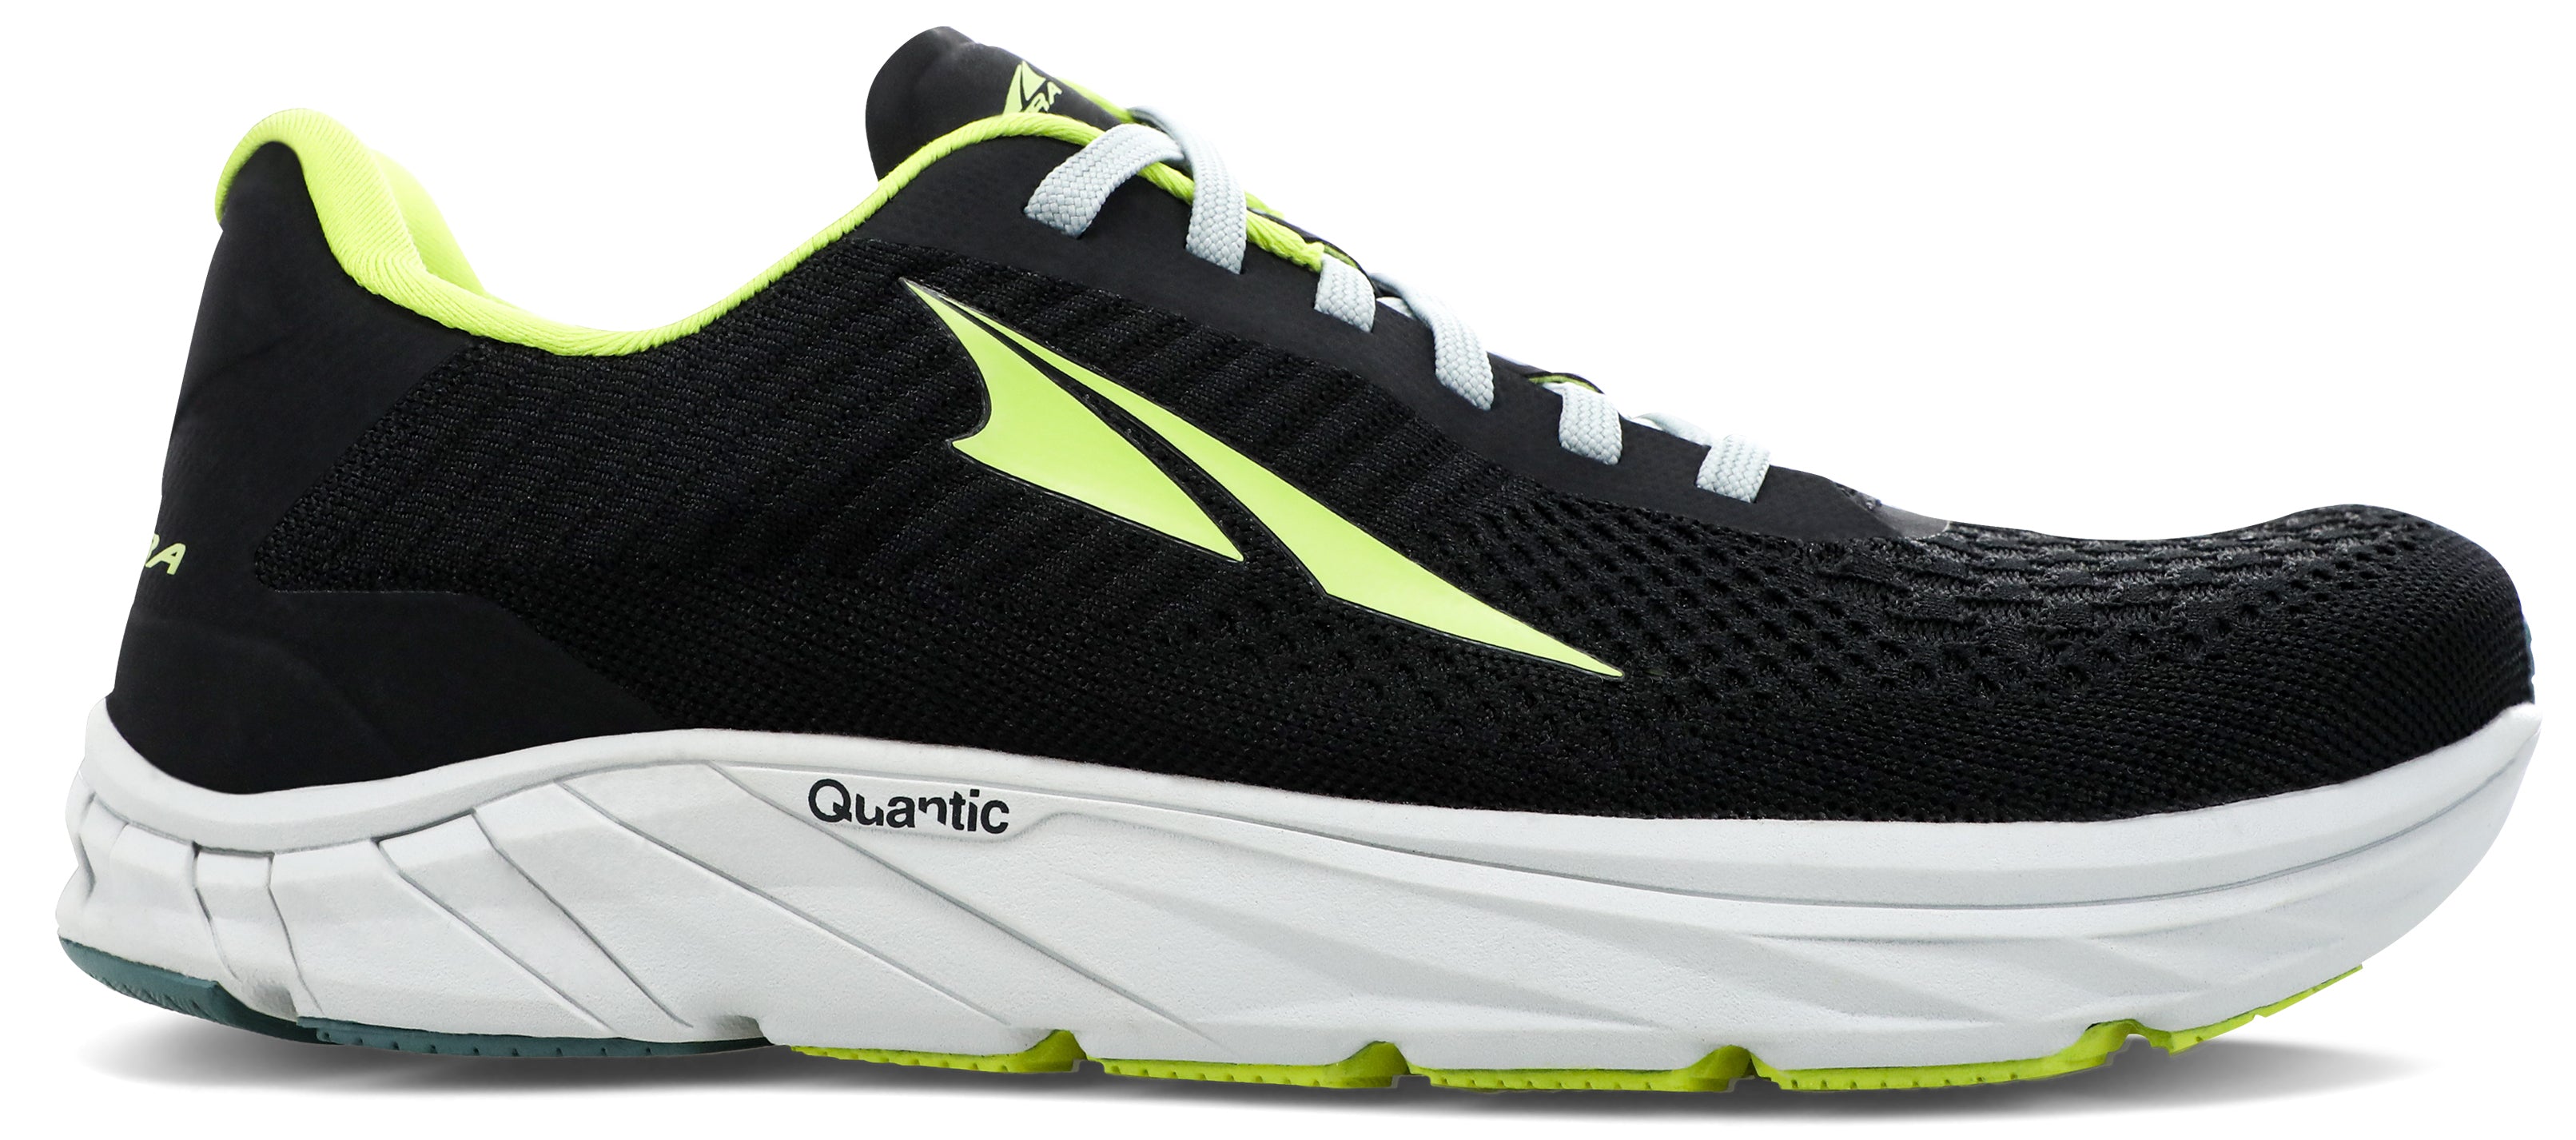 Altra Men's Torin 4.5 Plush Road Running Shoe in Black/Lime from the side